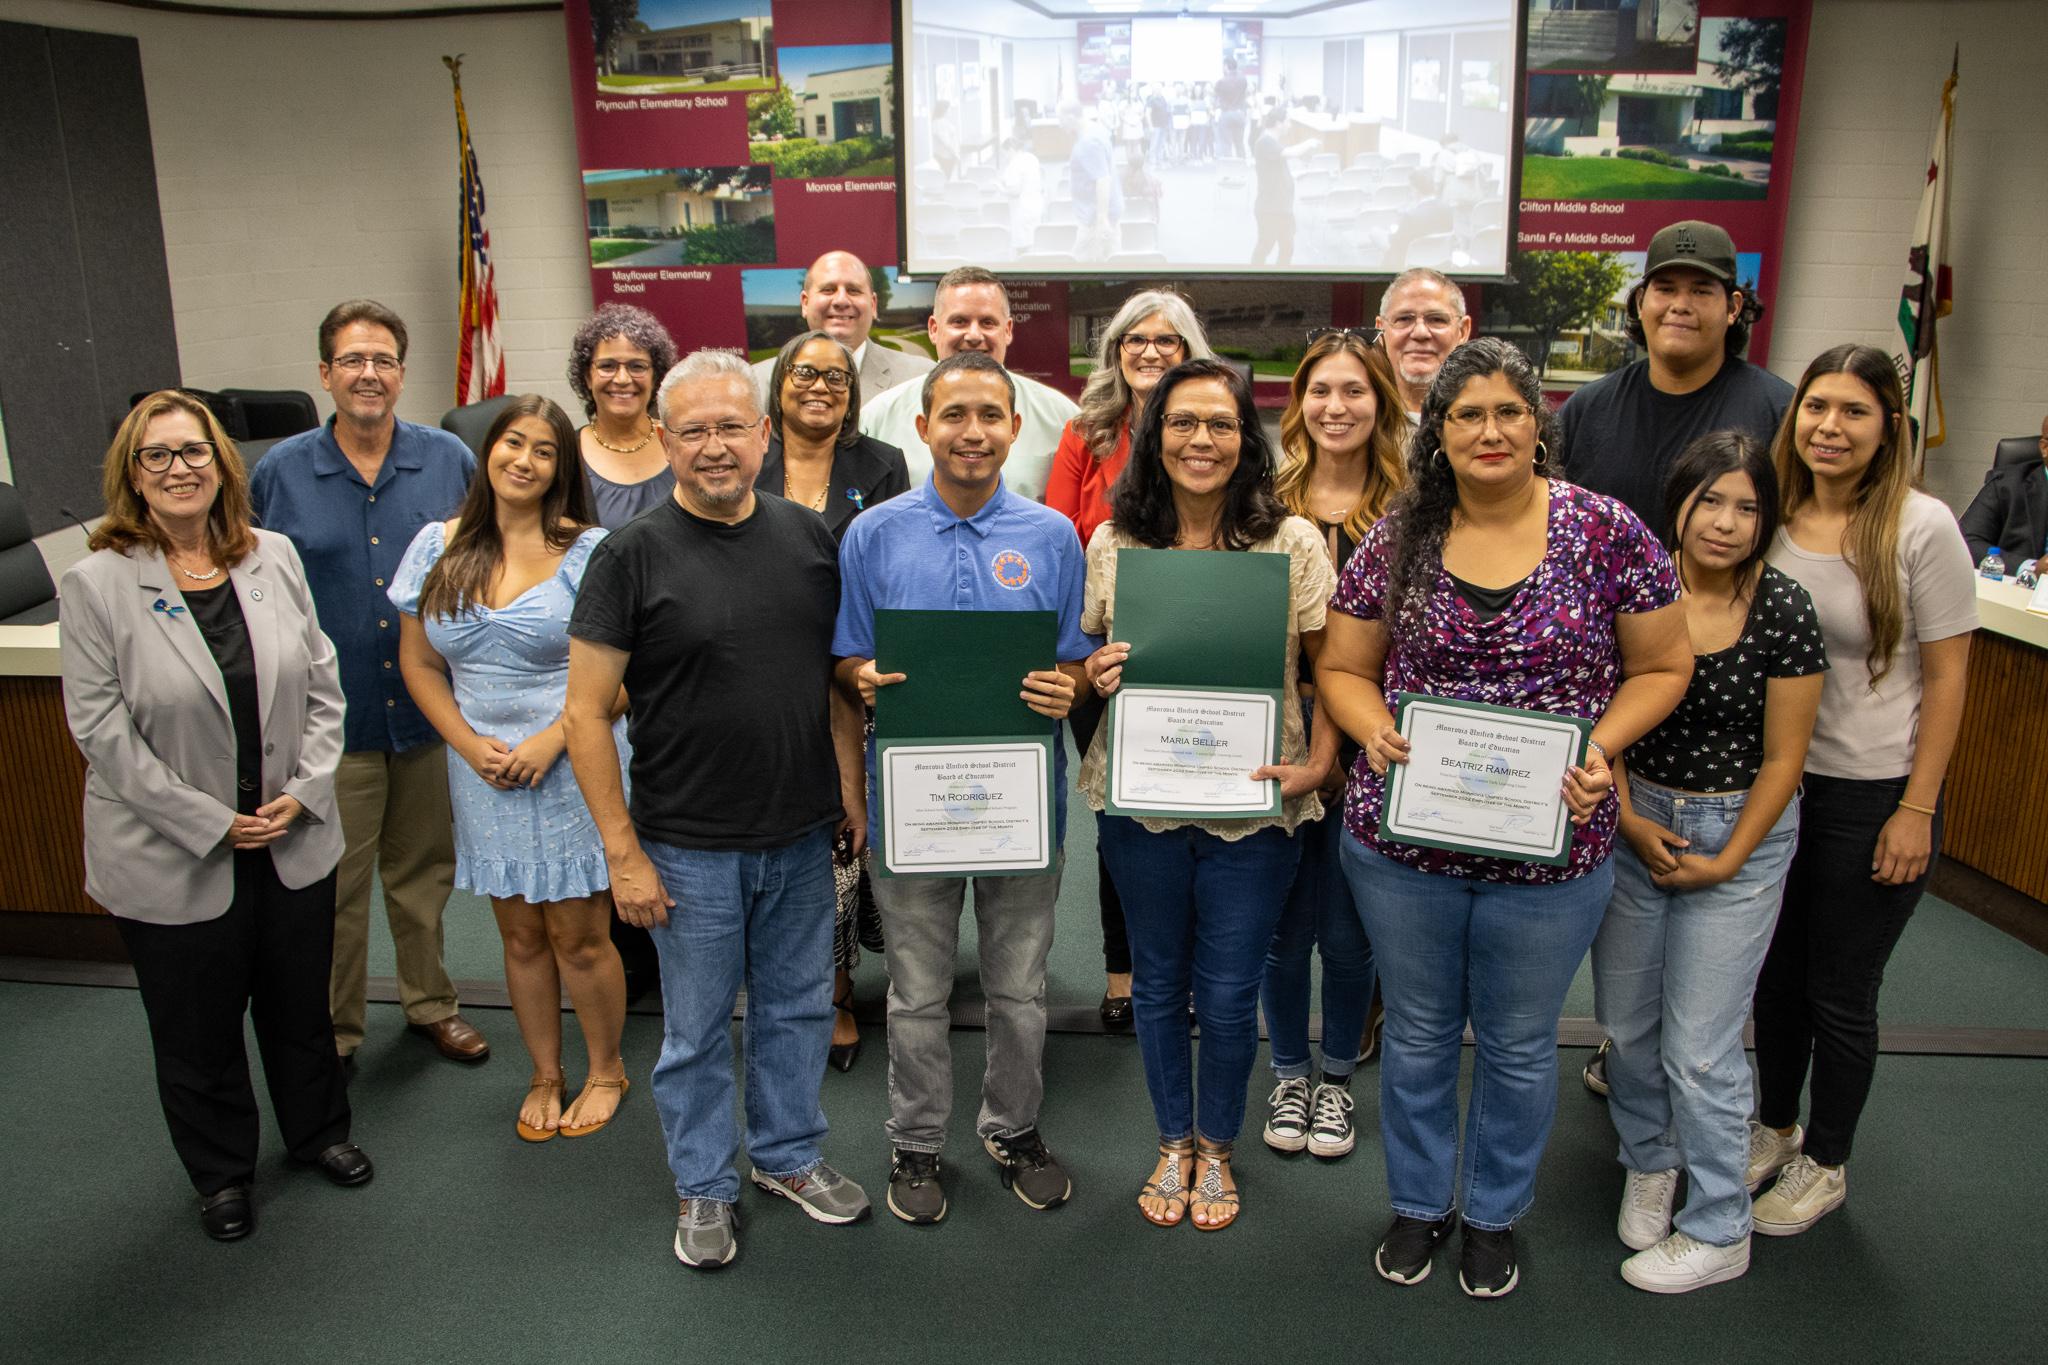 The Board of Education & the Chamber of Commerce congratulated employees on being named Monrovia Unified School District's "Employees of the Month" for September.